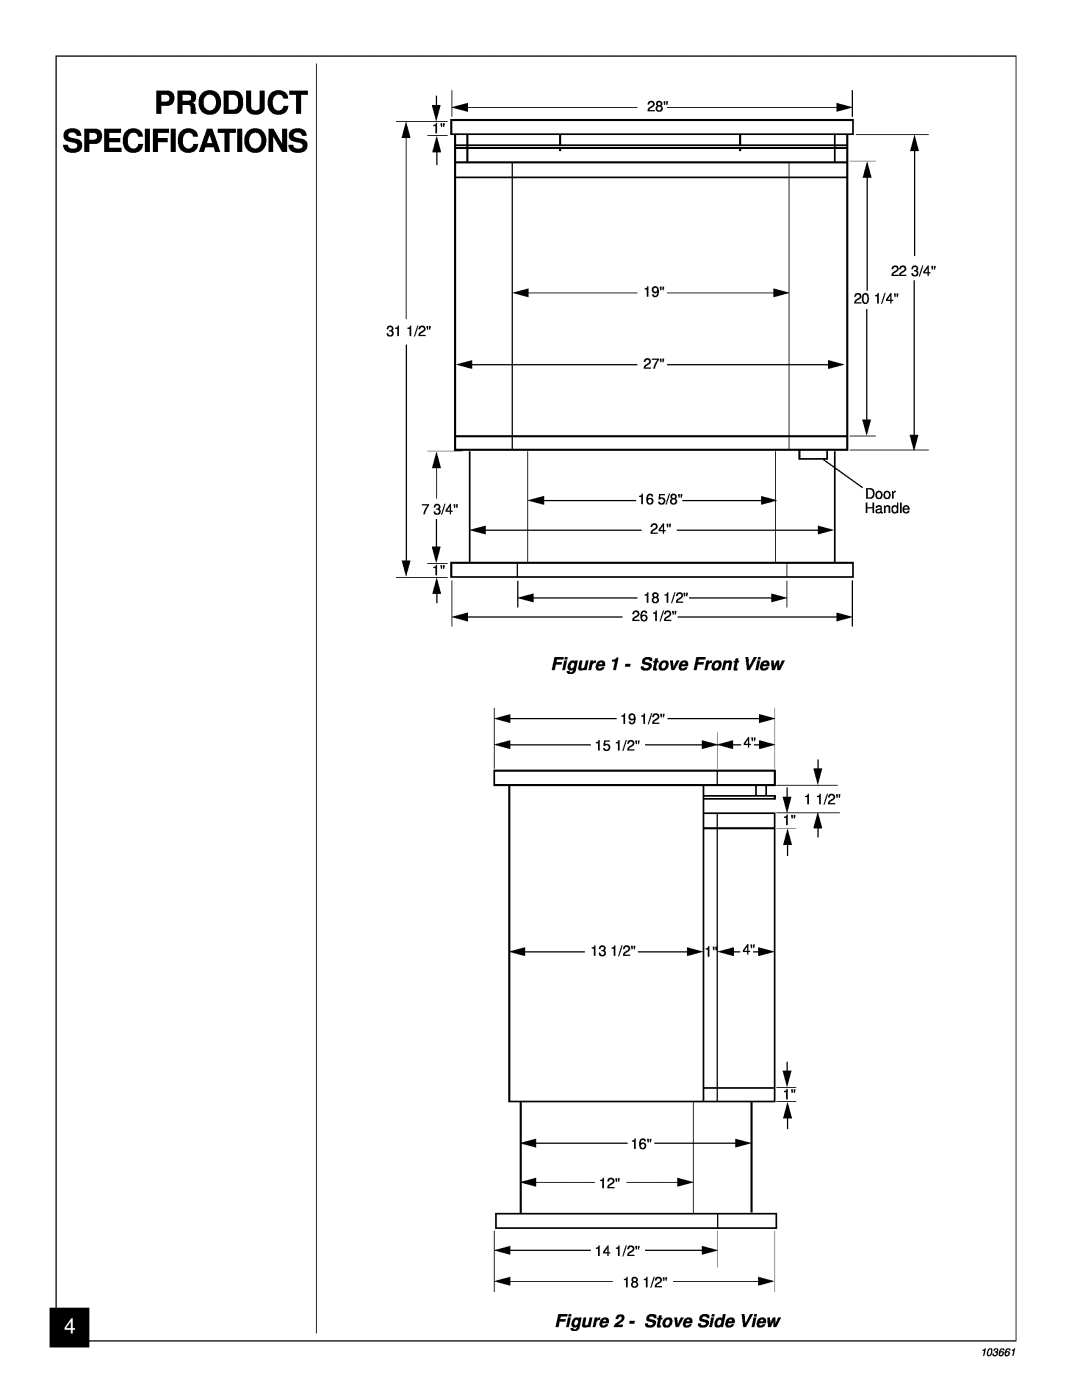 Vanguard Managed Solutions SVFBC installation manual Product Specifications, Stove Front View, Stove Side View, 103661 